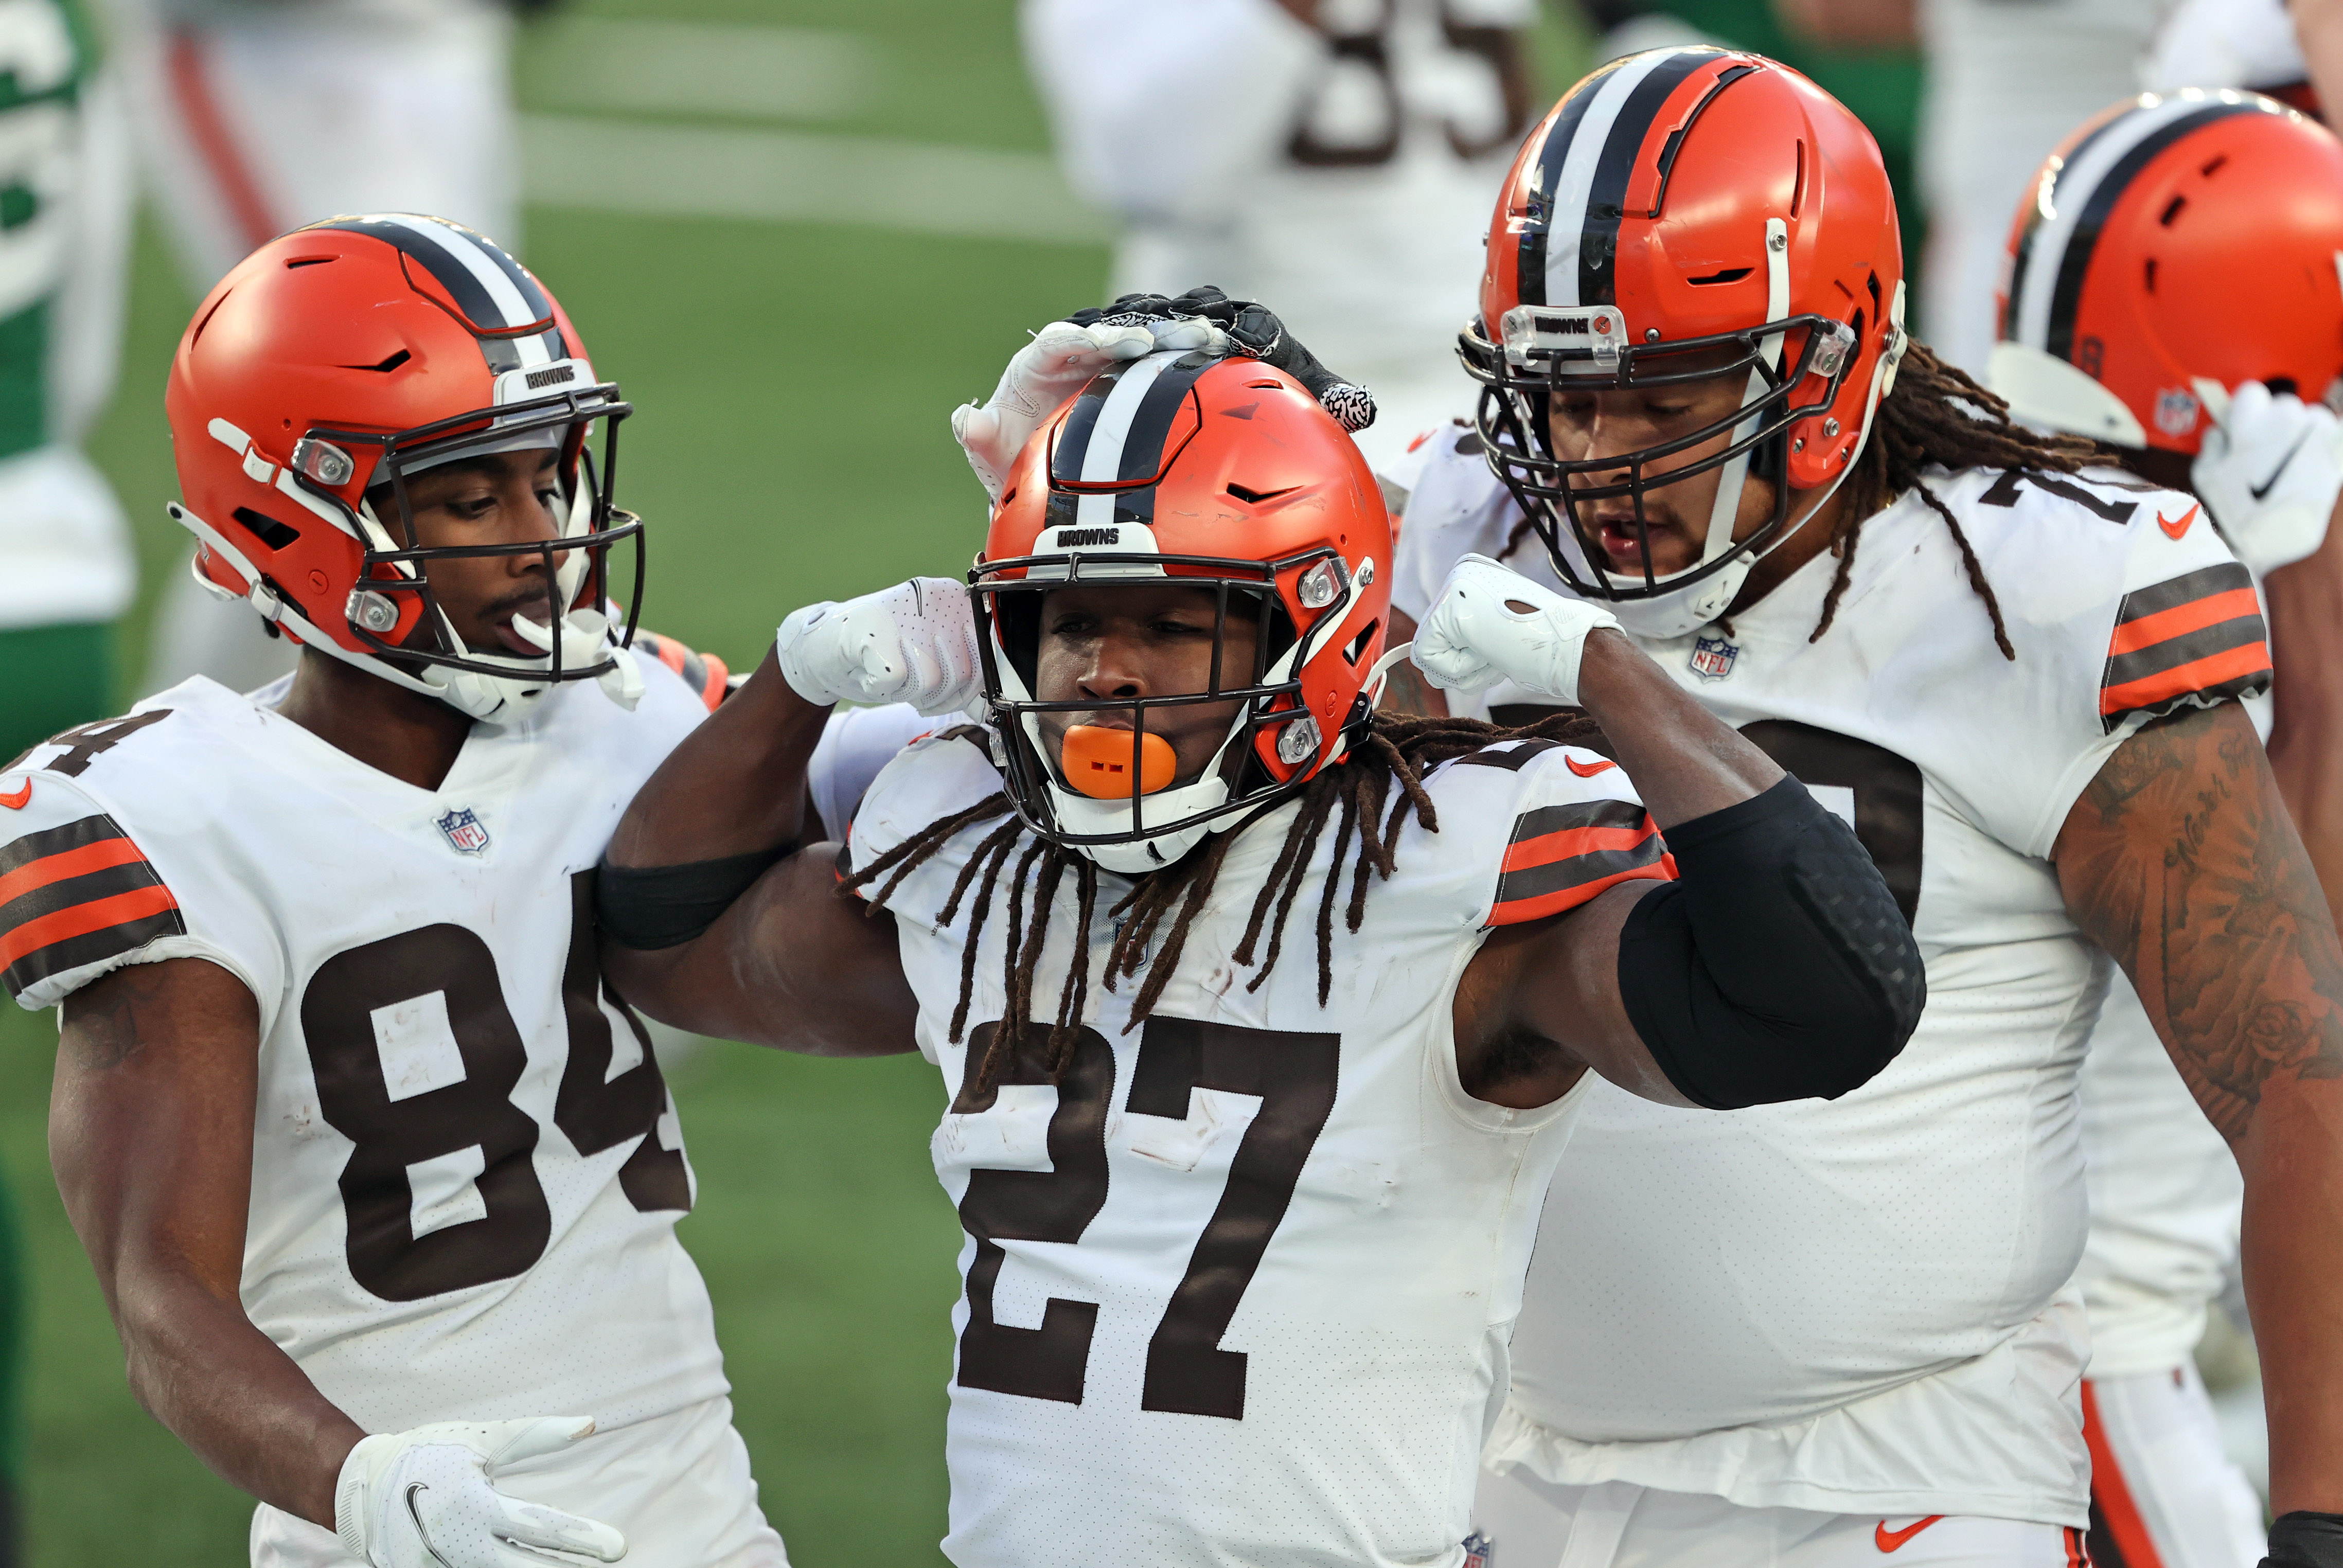 Browns showed vs. Steelers they're not ready for playoff football